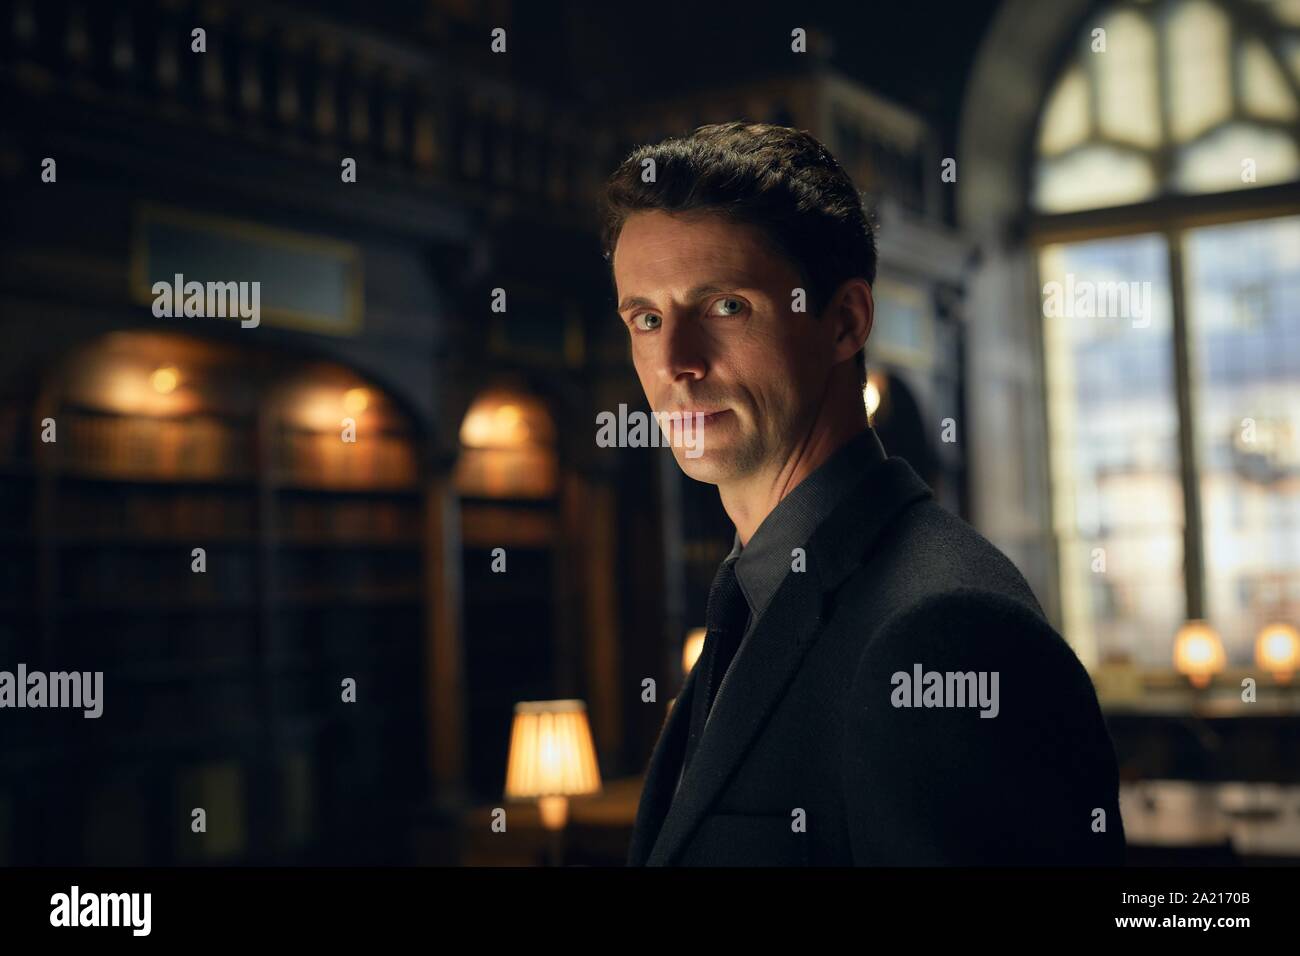 MATTHEW GOODE in A DISCOVERY OF WITCHES (2018), directed by JUAN CARLOS MEDINA and FARREN BLACKBURN. Credit: AMC / Album Stock Photo